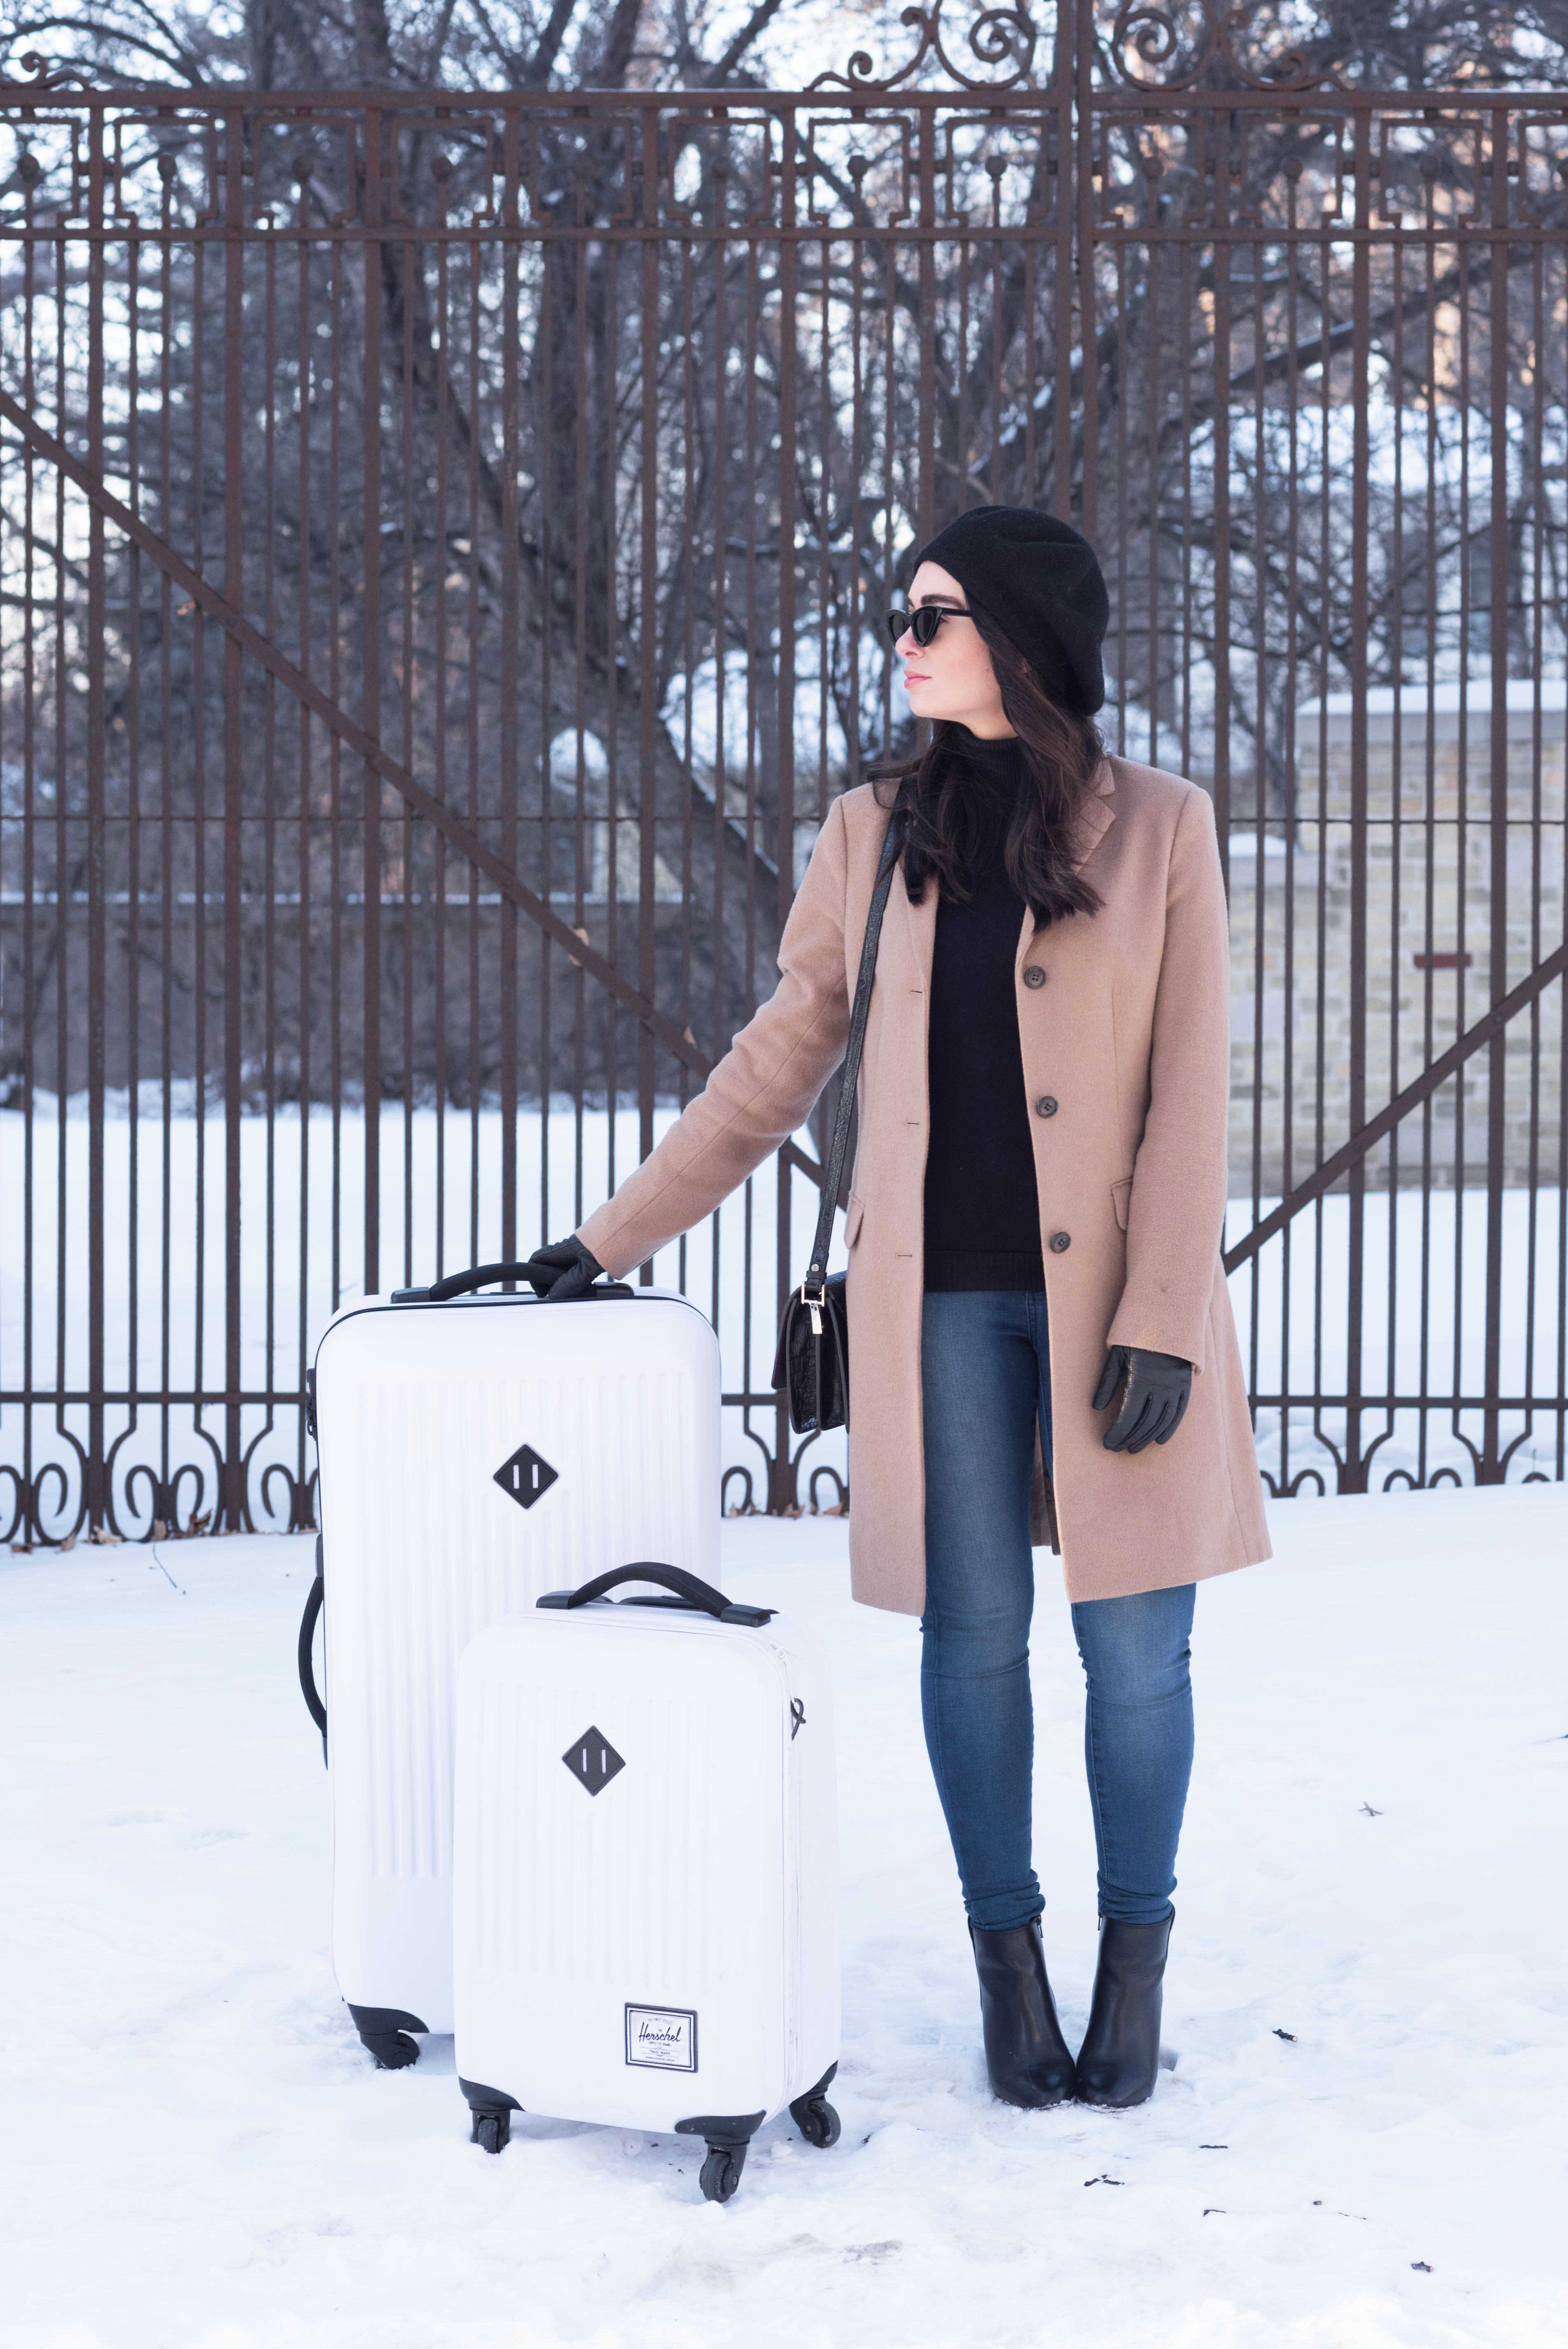 Fashion blogger Cee Fardoe of Coco & Vera leans on her white Herschel Supply Co. suitcase, wearing a Uniqlo camel coat and Le Chateau black sweater